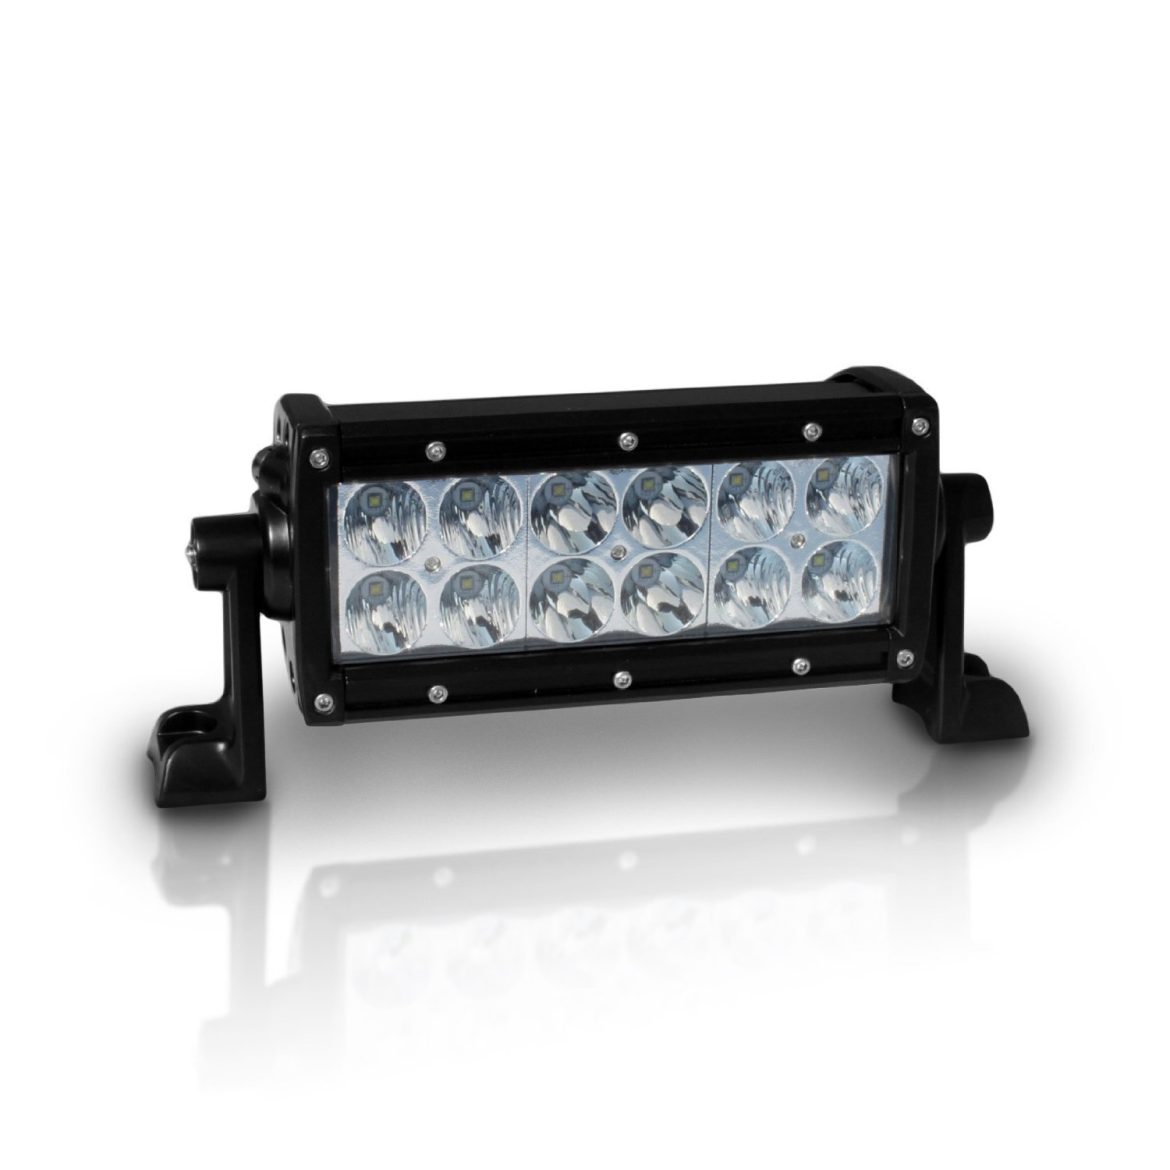 Adding a Dual Row LED Light Bar to Your Truck, Jeep, SUV Or ATV